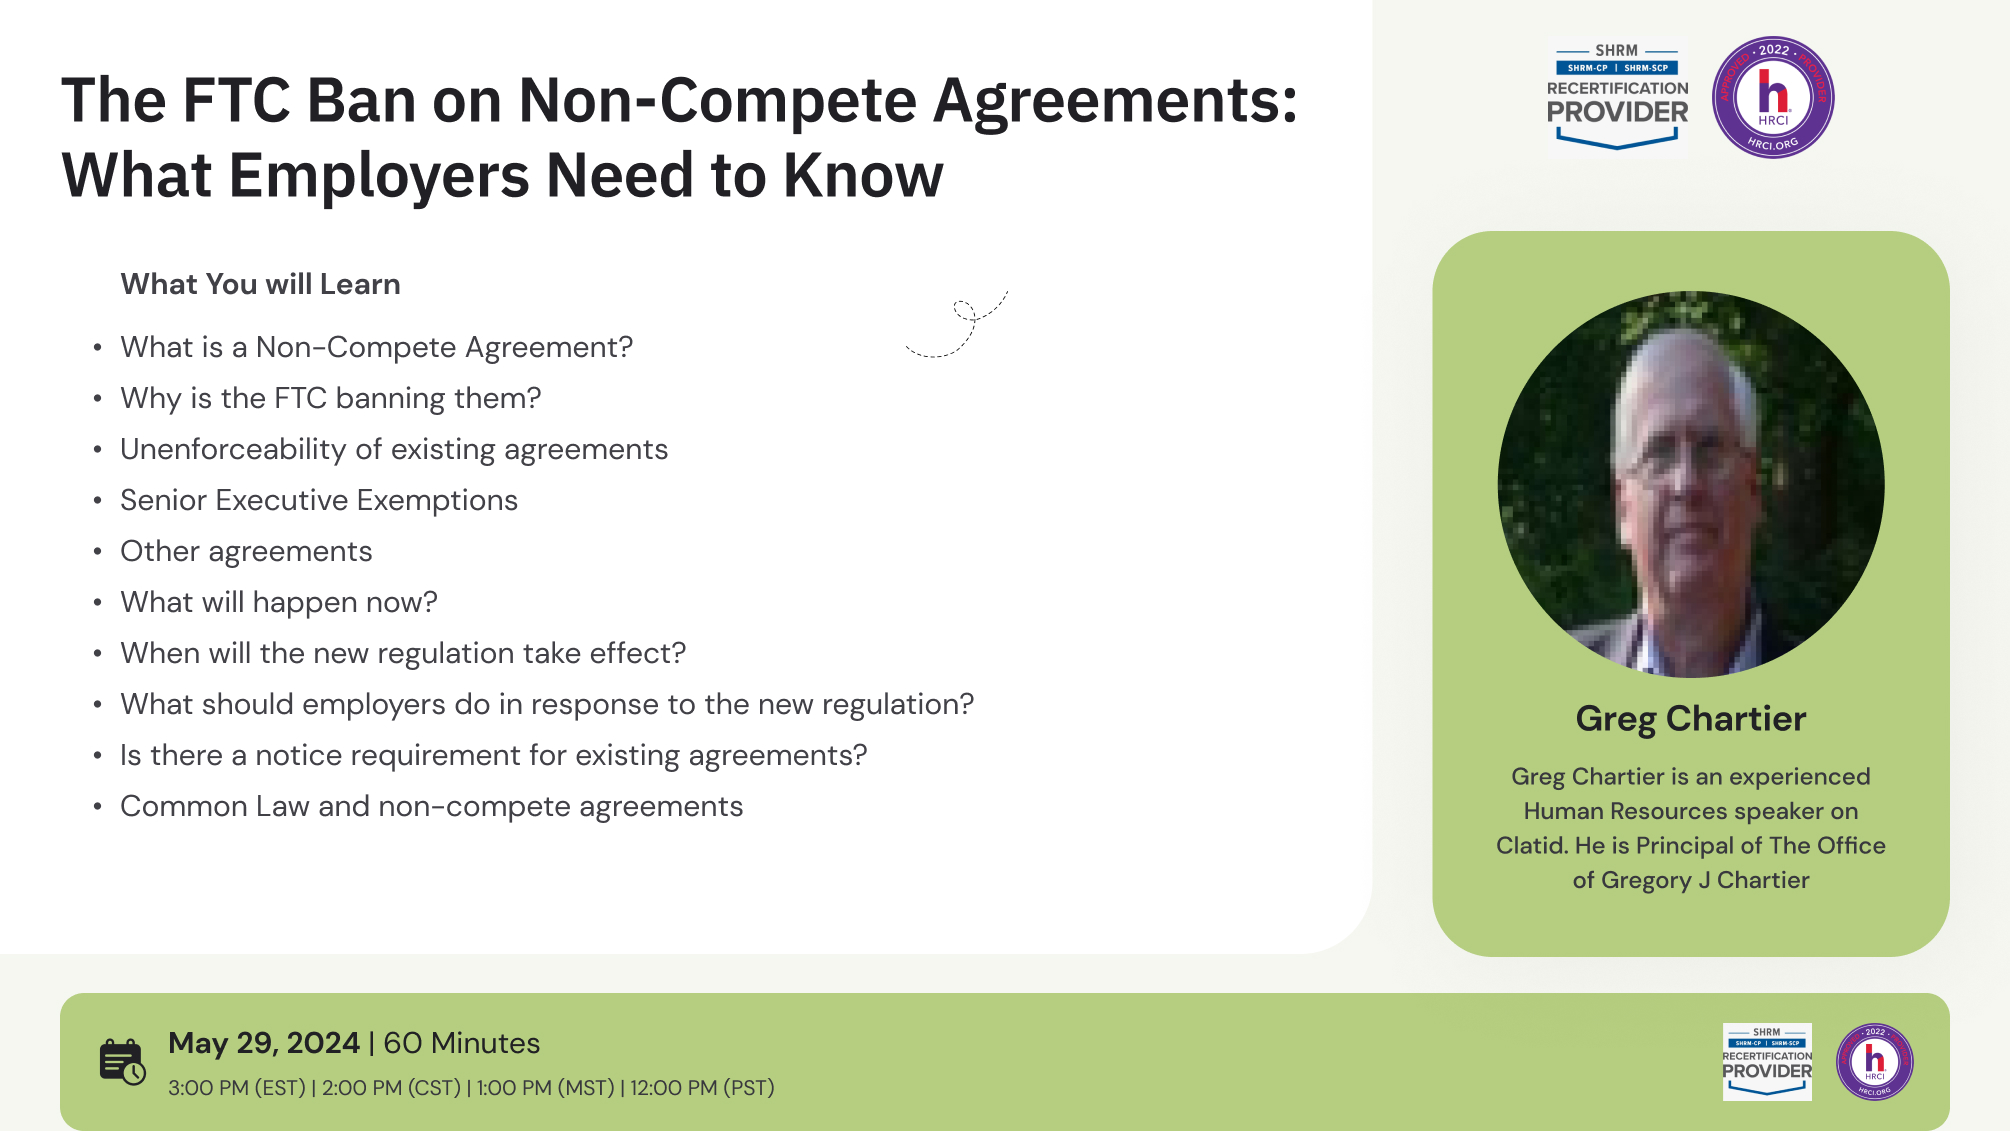 The FTC Ban on Non-Compete Agreements: What Employers Need to Know